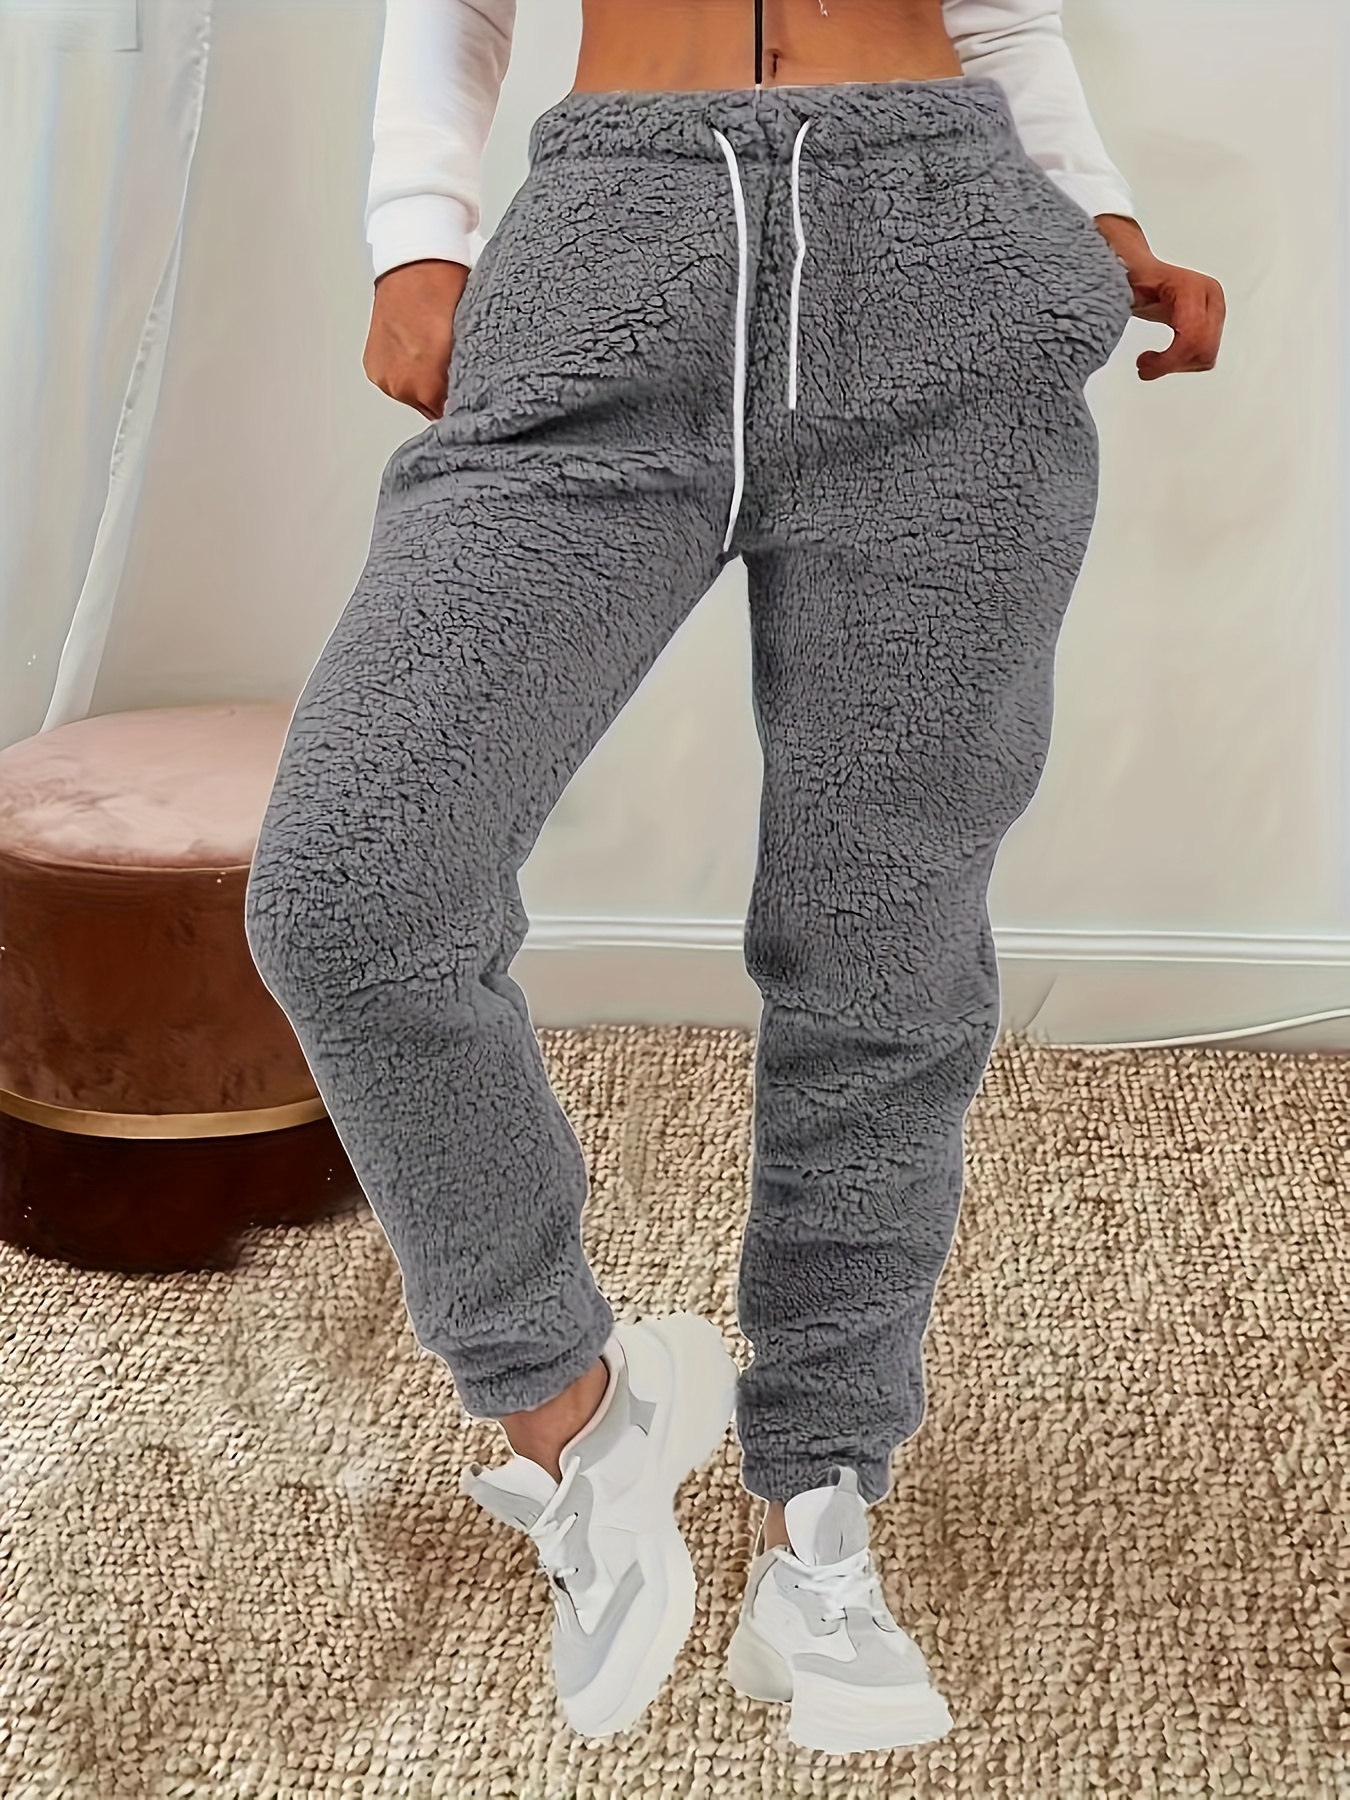 ZENEX Womens Sweatpants with Pockets,Drawstring Joggers for Women